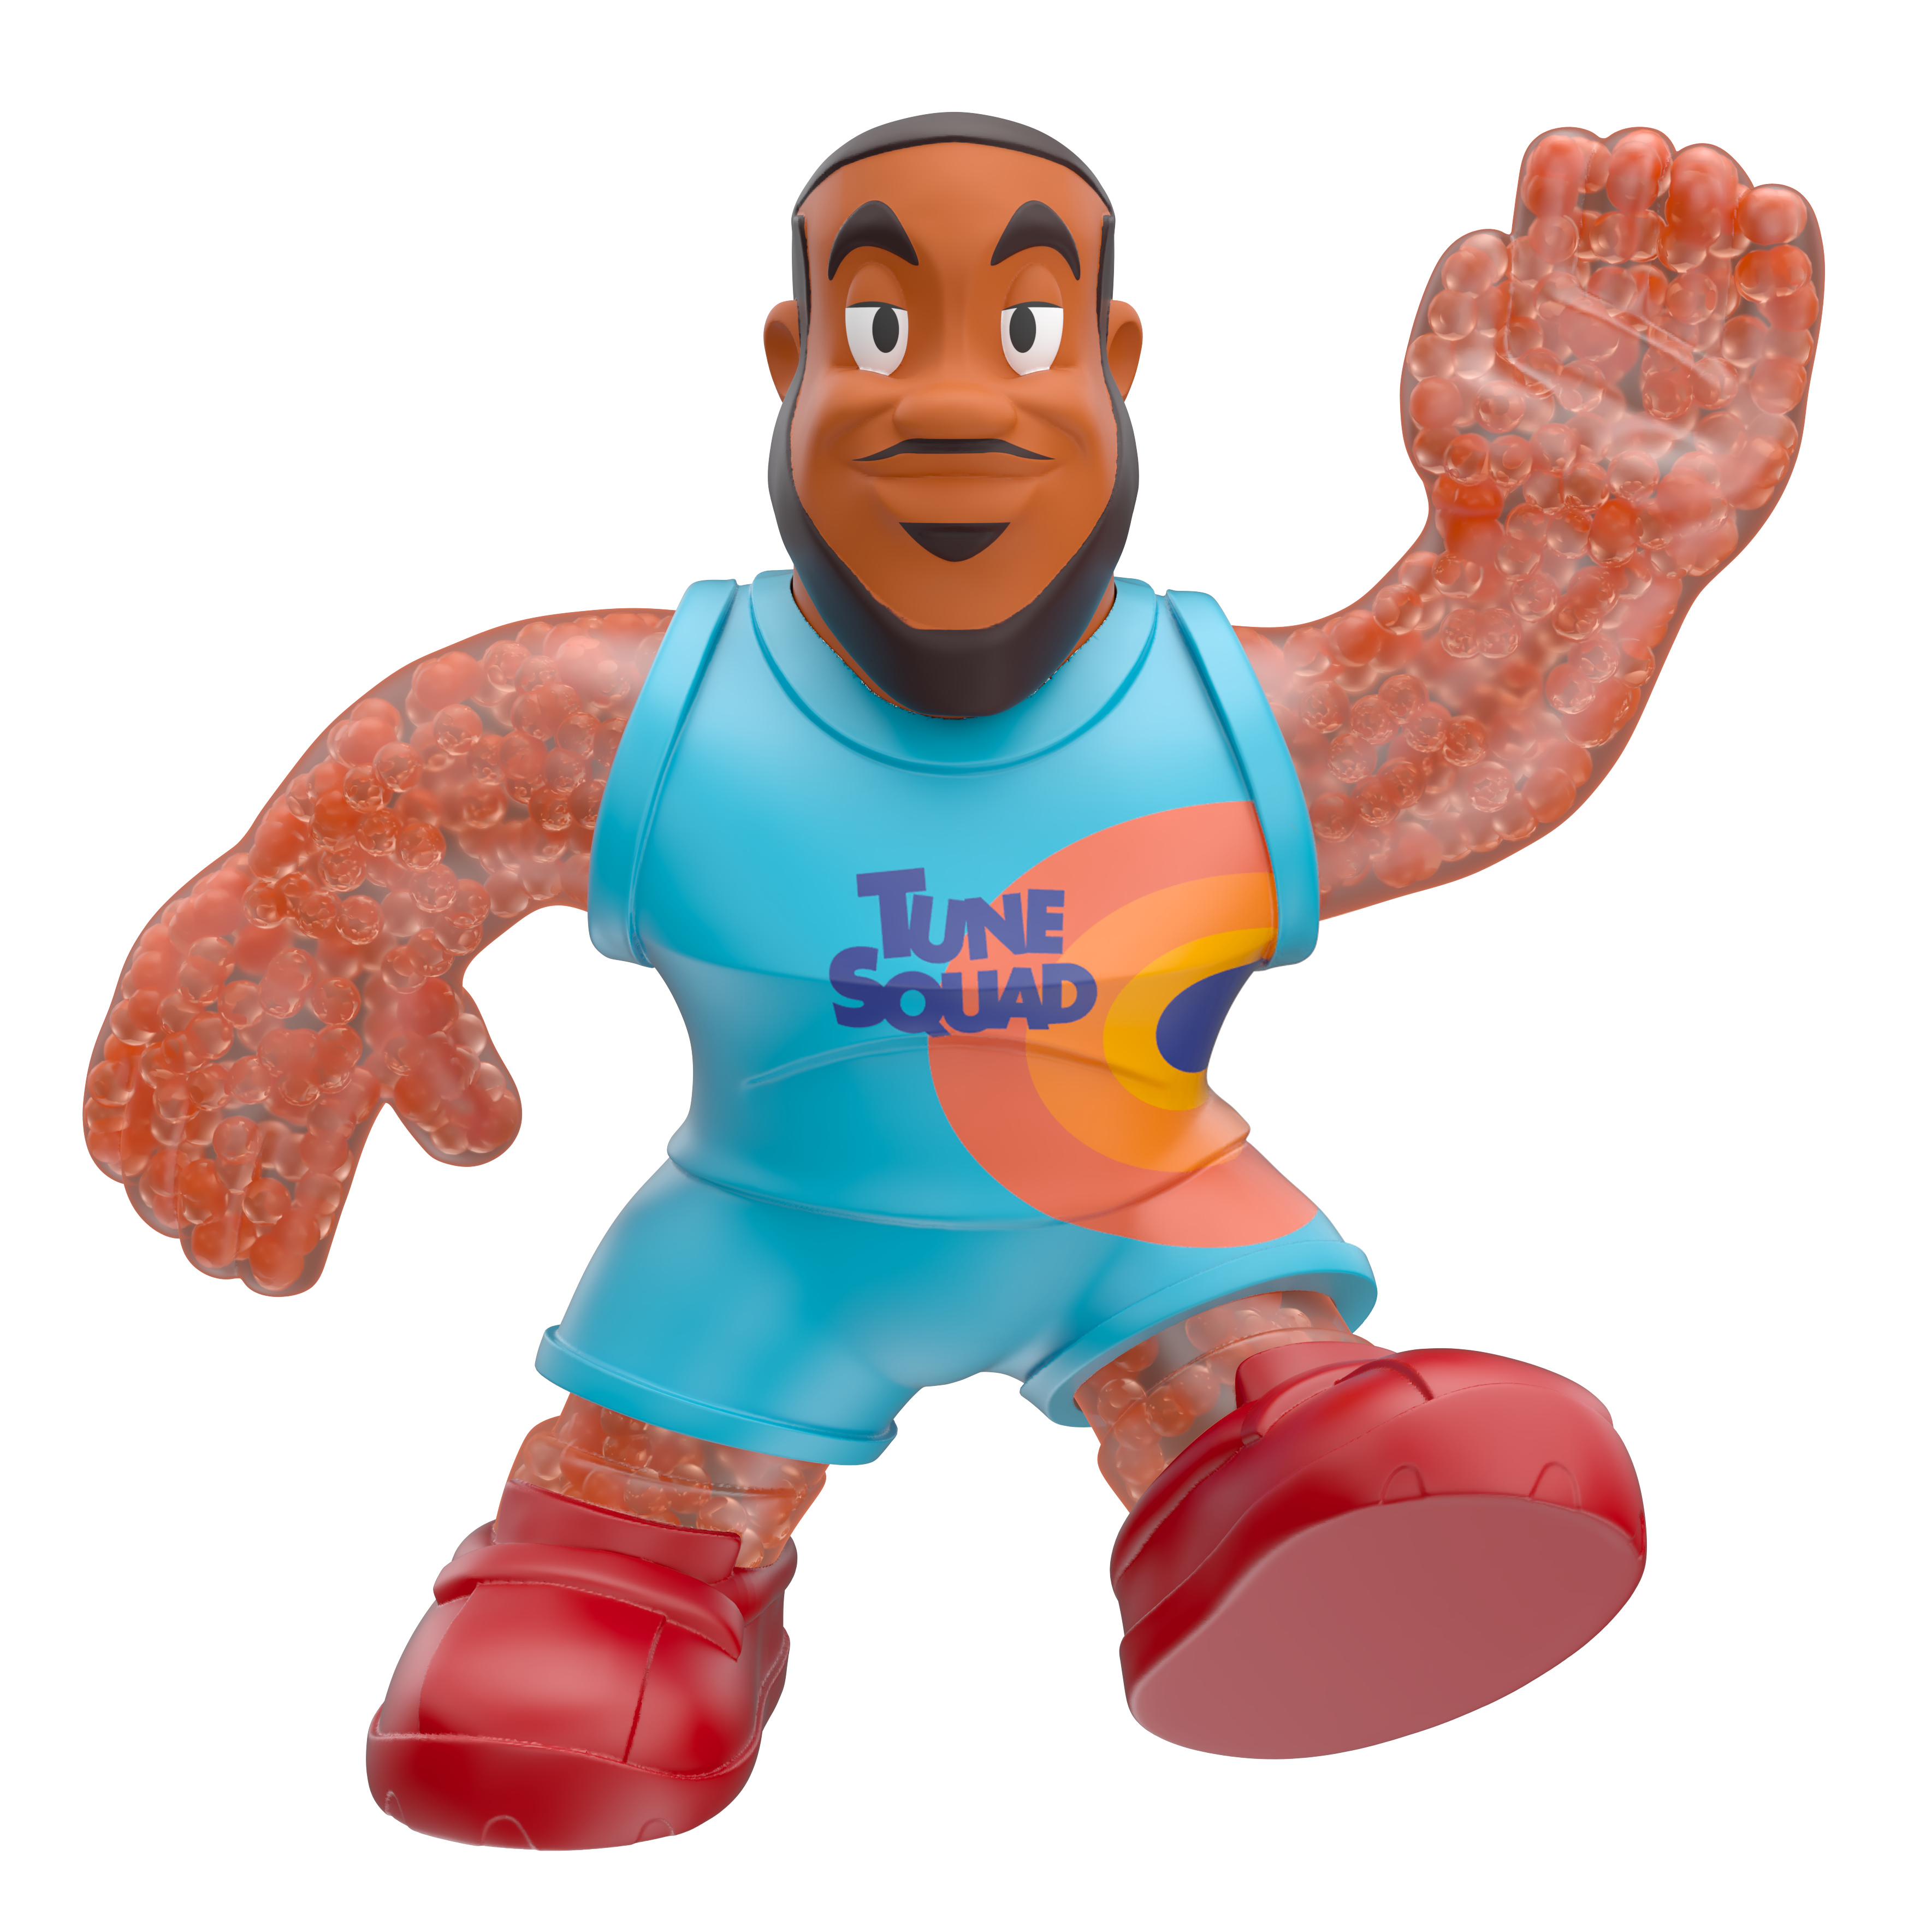 Moose Toys 14594 Space Jam: A New Legacy - 5" Stretchy Goo Filled Action Figure - Lebron James - image 4 of 10